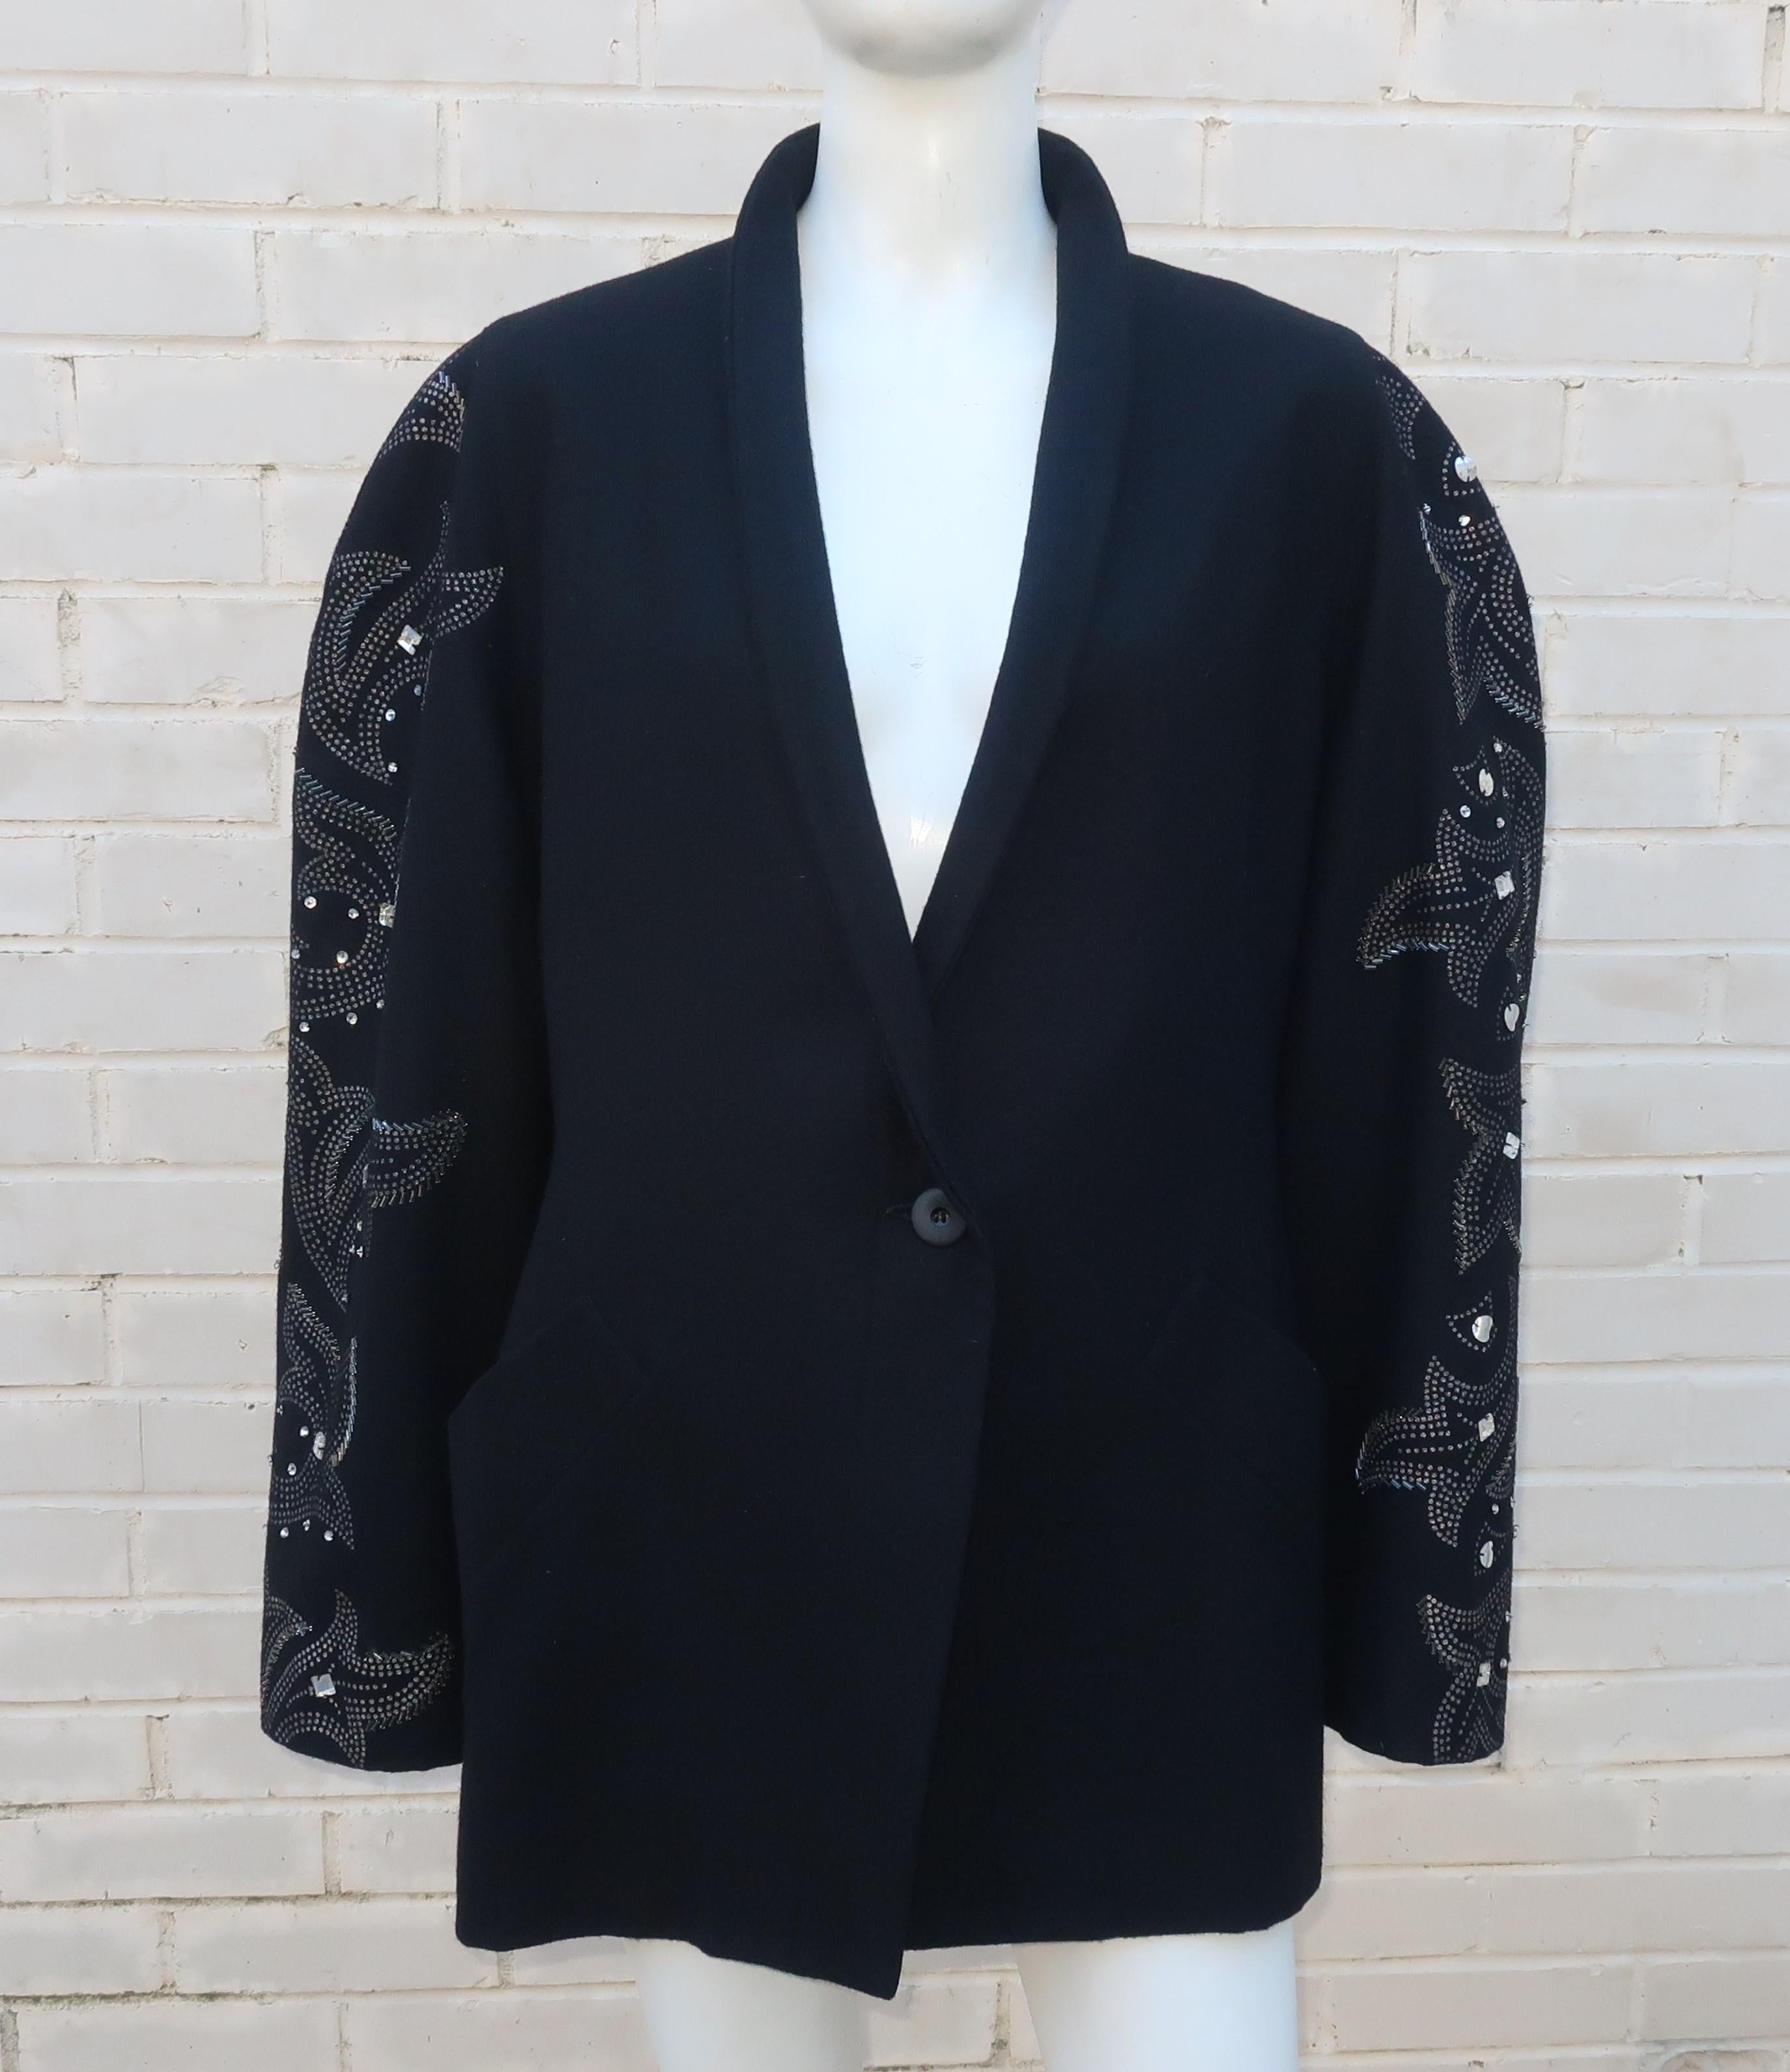 This 1980’s Byblos black wool jacket has a disco vibe with sleeves embellished by a silver print, faceted stones, sequins and beads.  The shawl collar, rounded shoulder line and simple single button front give the design a tux or boyfriend jacket